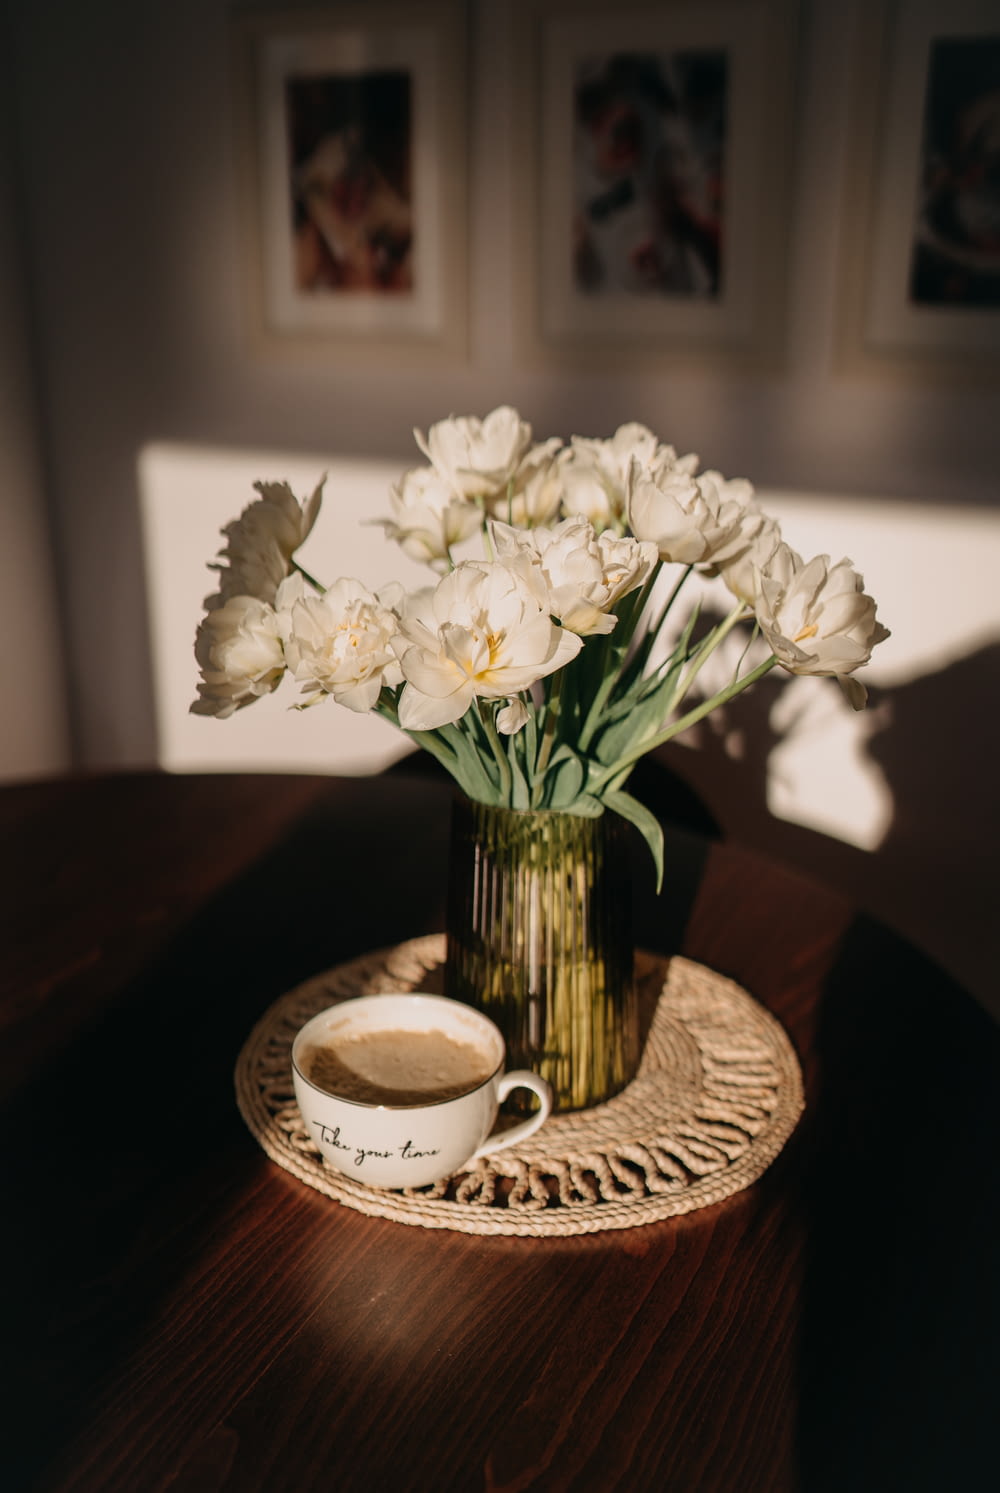 a vase of flowers on a table with a cup of coffee